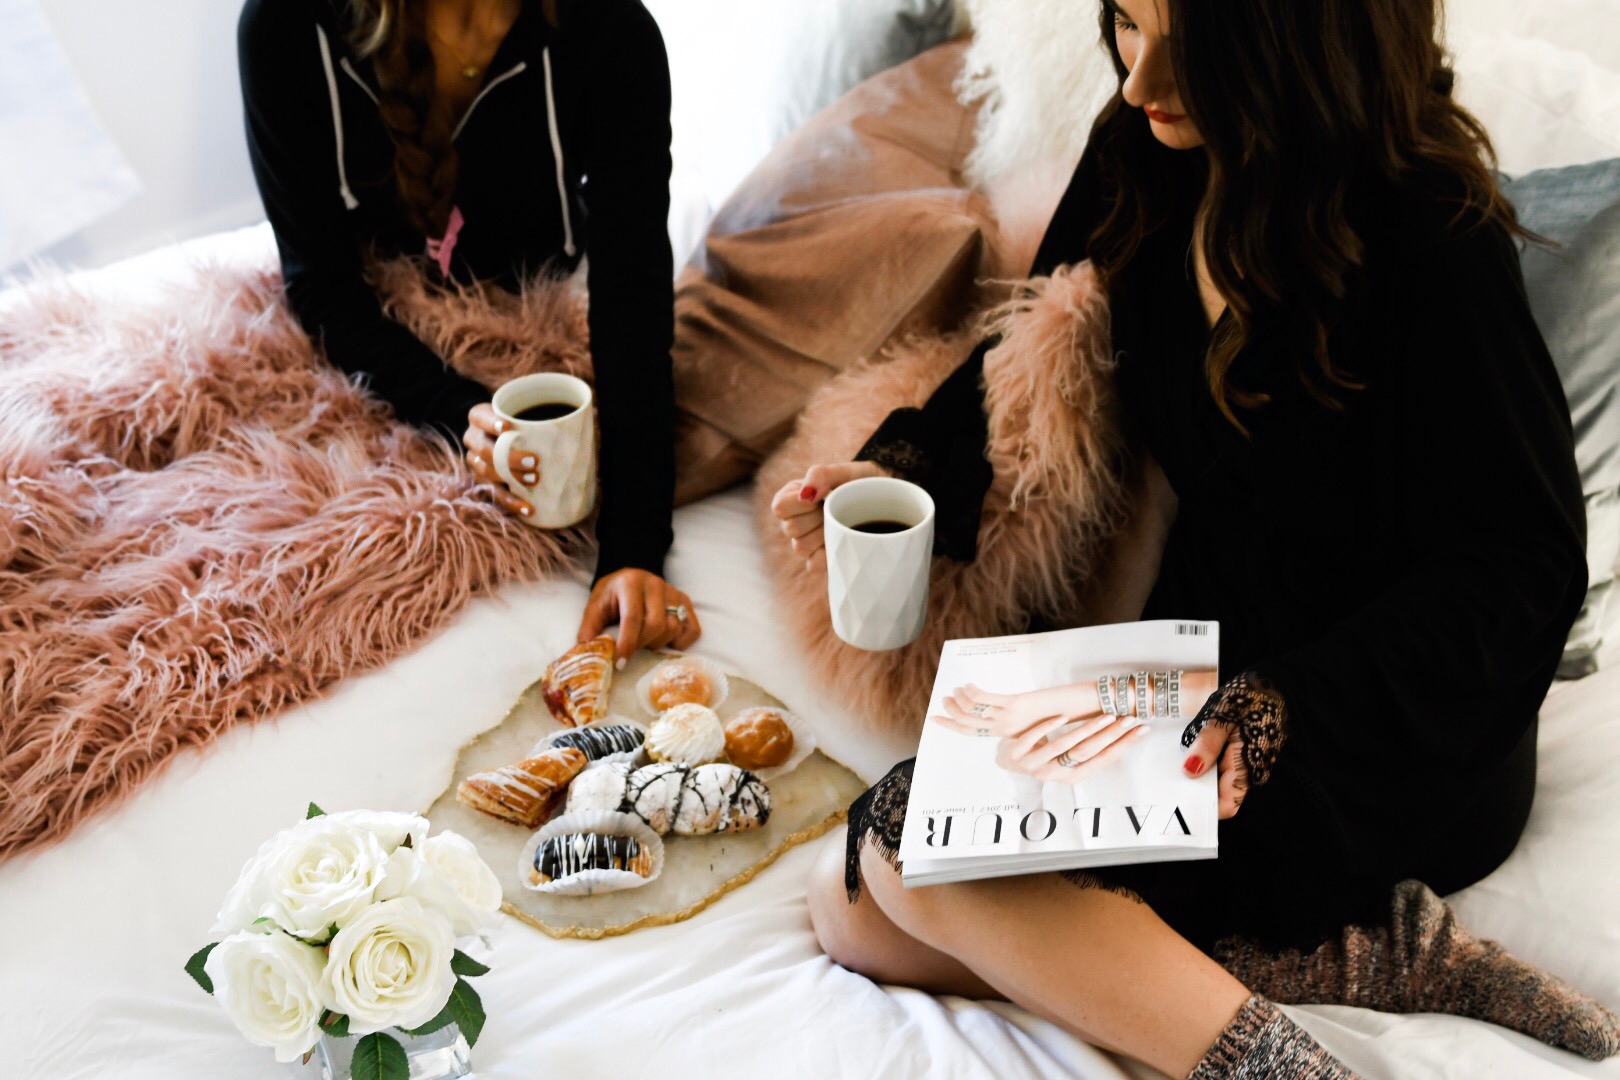 Girls' Night In With Valour Magazine Esther Santer Fashion Blog NYC Street Style Blogger Outfit OOTD Trendy Eishes Style Cozy Blanket Throw Pillows Flowers Desserts Pastries Black Robes Pink Fur Fuzzy Slippers Jcrew Adore Me Socks Mugs  Coffee  Women.jpg